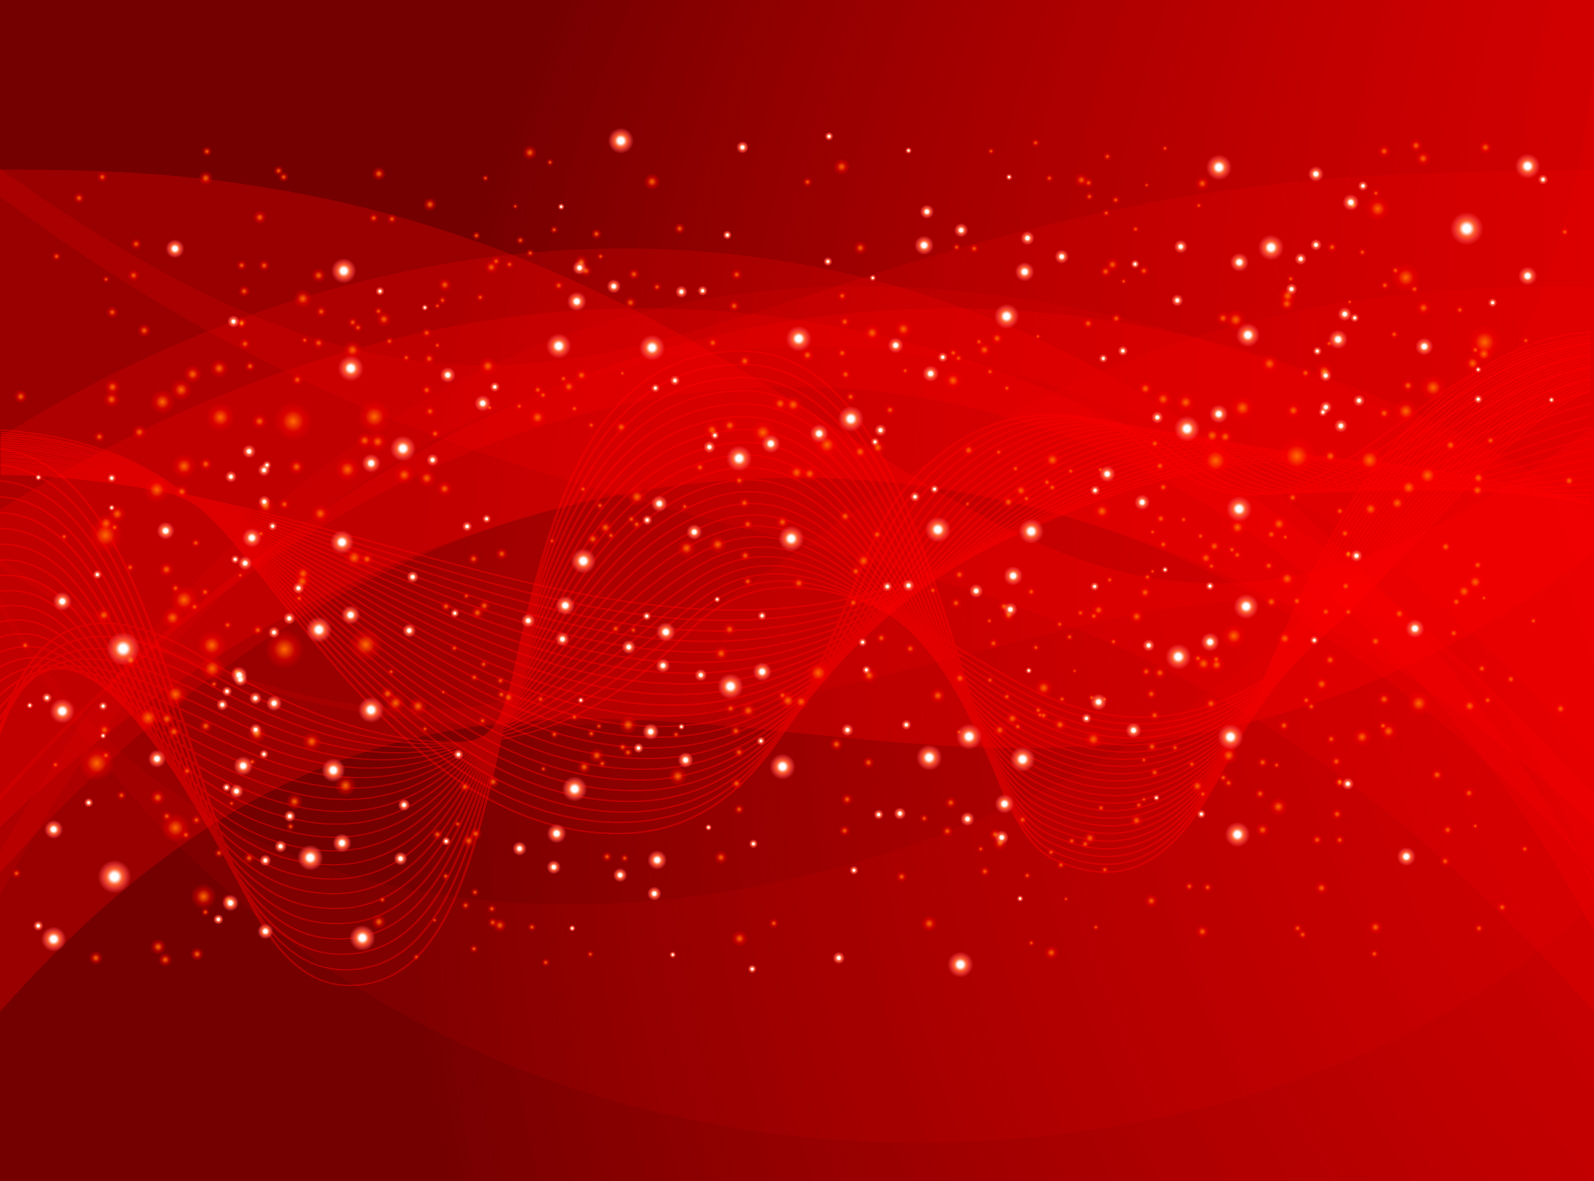 Gauzy Starry Red Abstract Background Vector